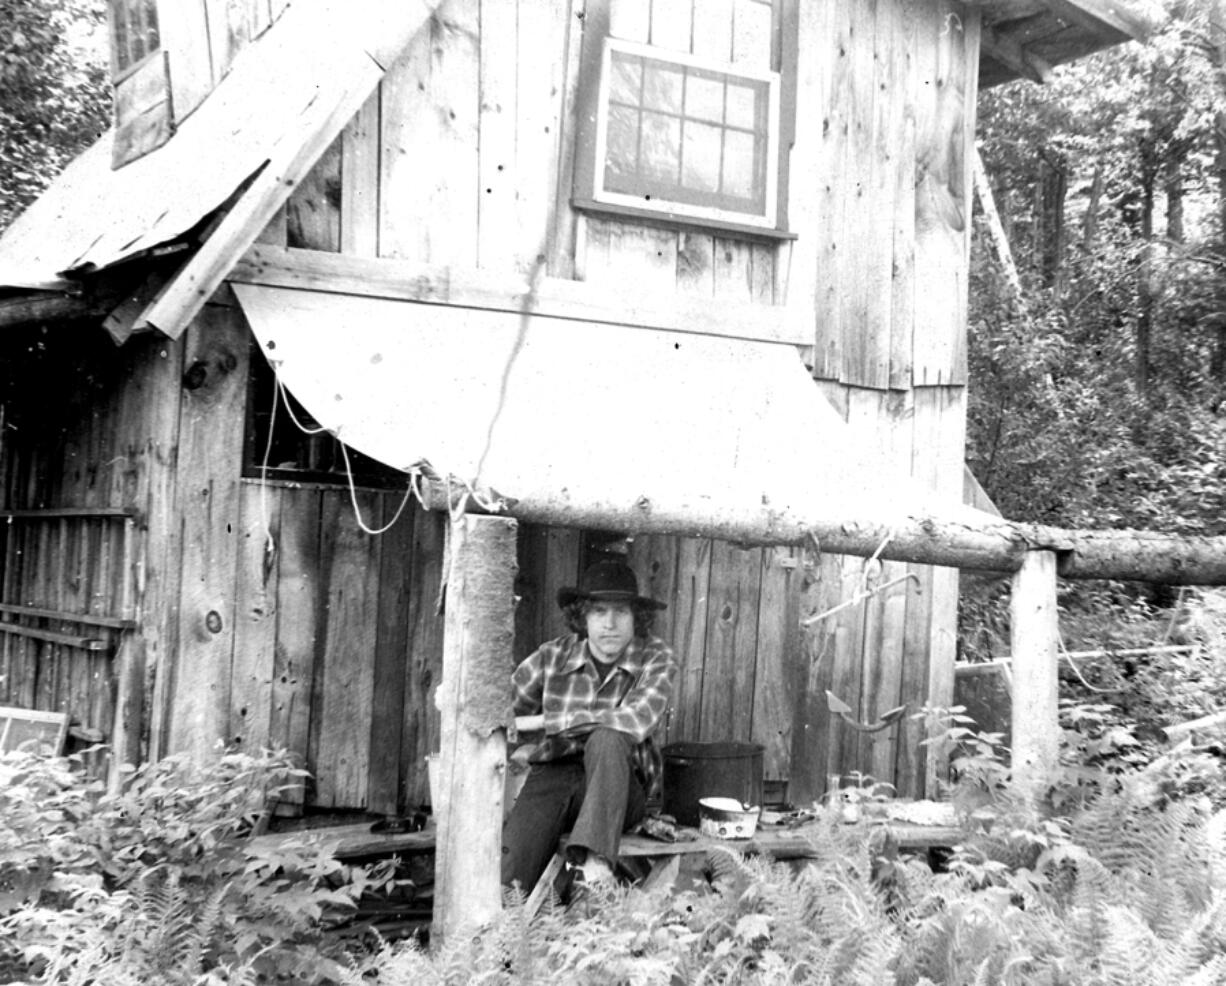 Author Stephen Altschuler in 1977, age 32, and his home in the New Hampshire woods.